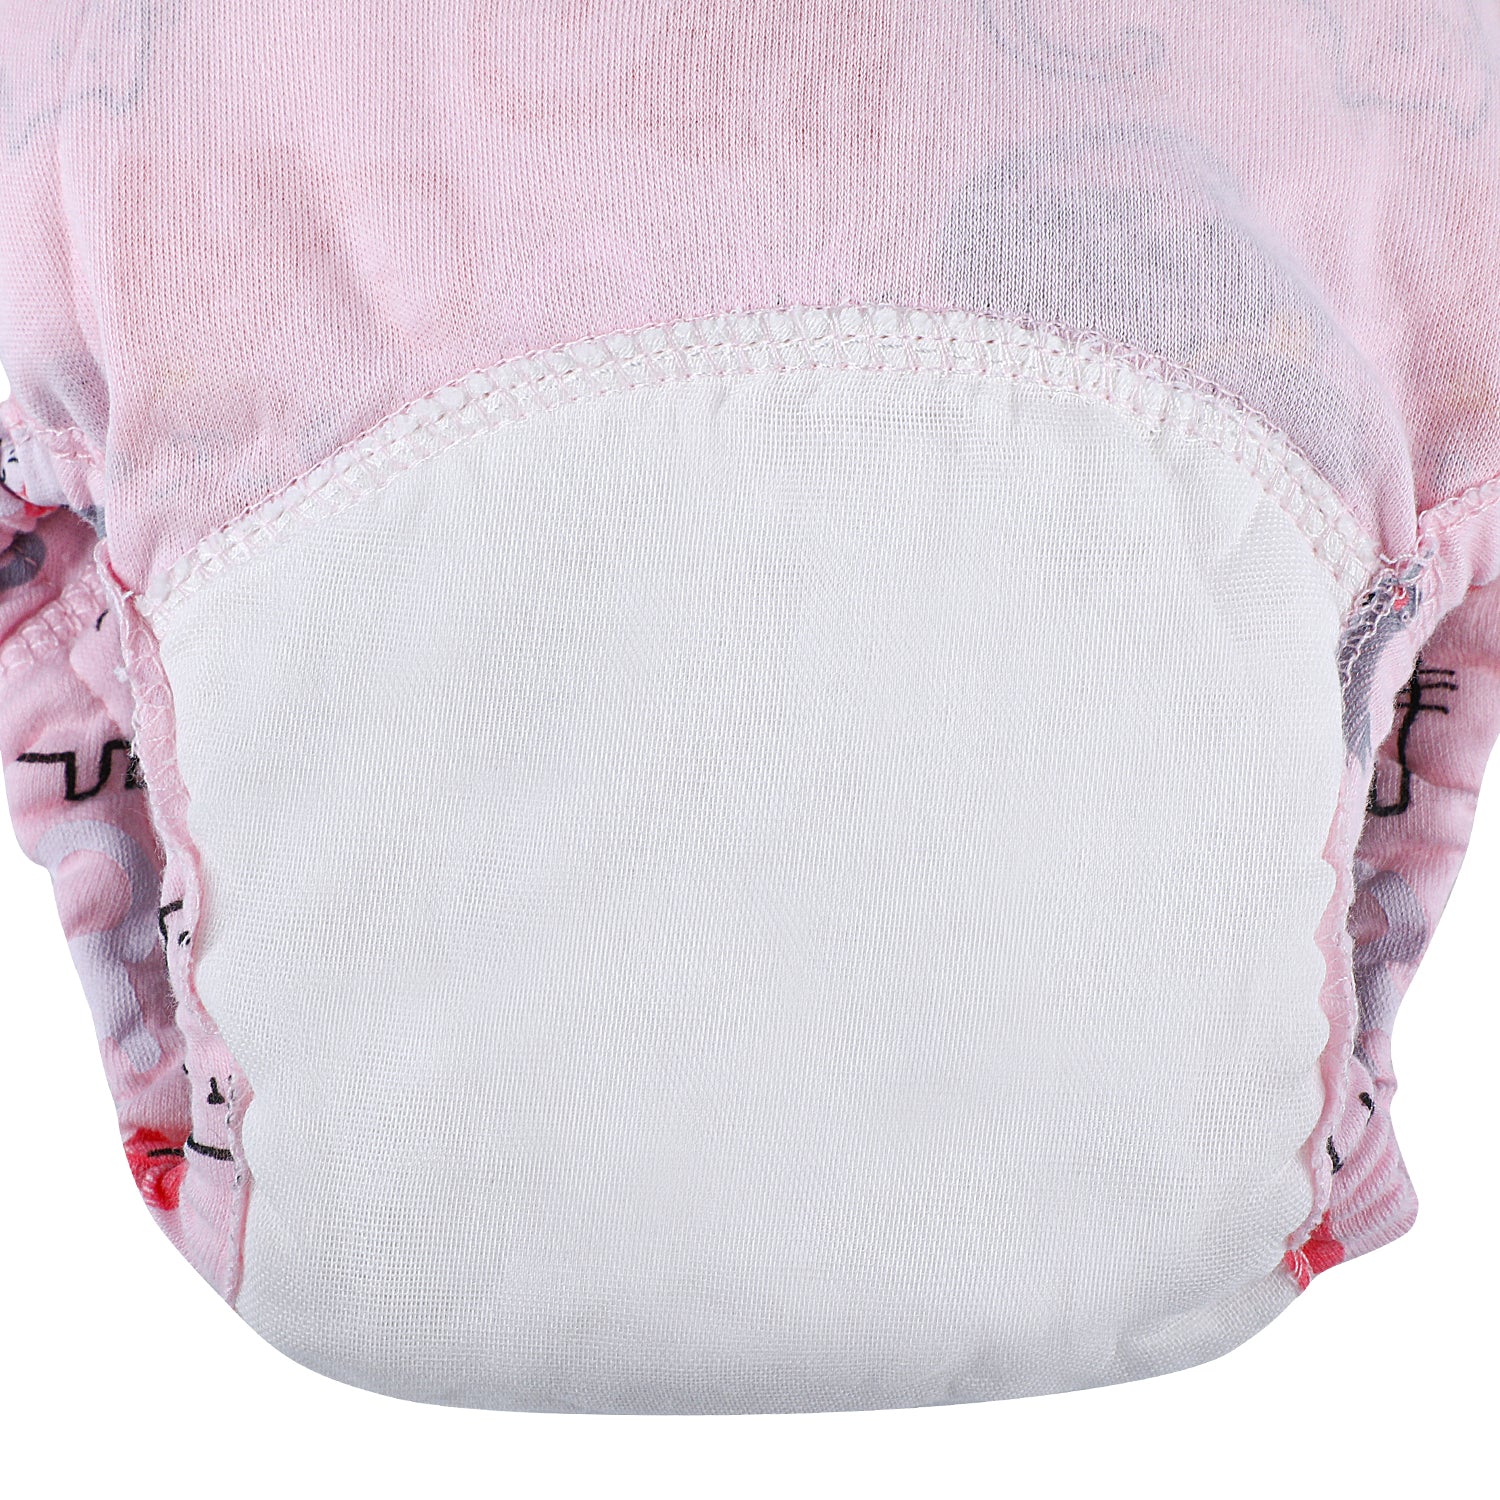 Star Kitty Reusable Cloth Training Pants Clothing Accessory Diaper Panty 2 Pcs - Multicolour - Baby Moo